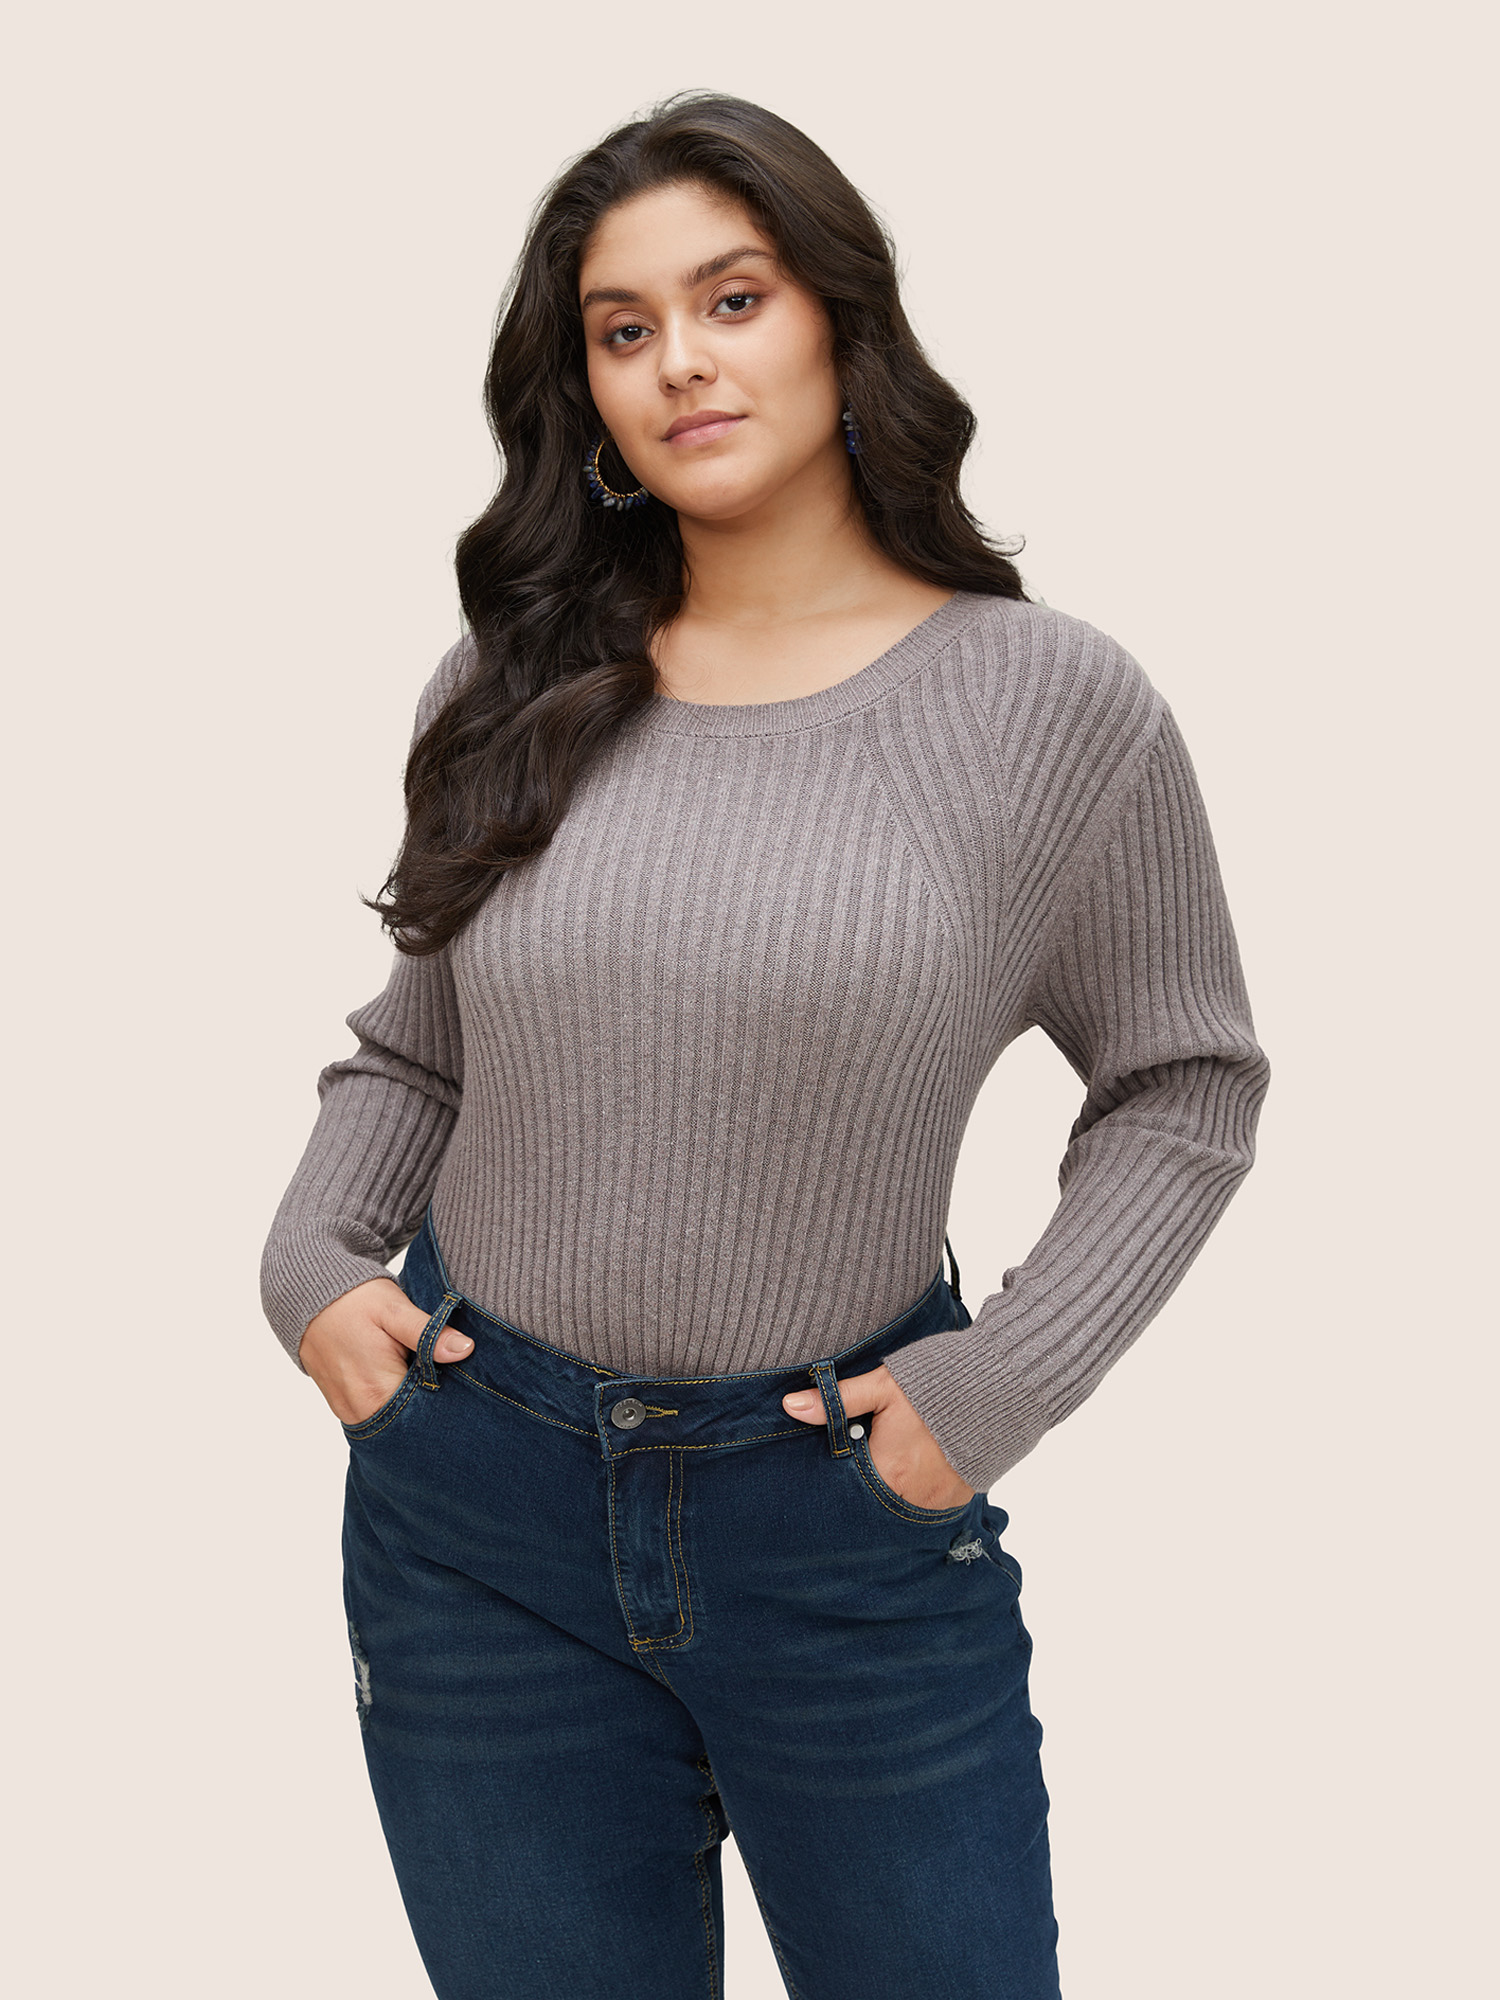 

Plus Size Supersoft Essentials Solid Texture Pullover Gray Women Basics Long Sleeve Round Neck Everyday Pullovers BloomChic